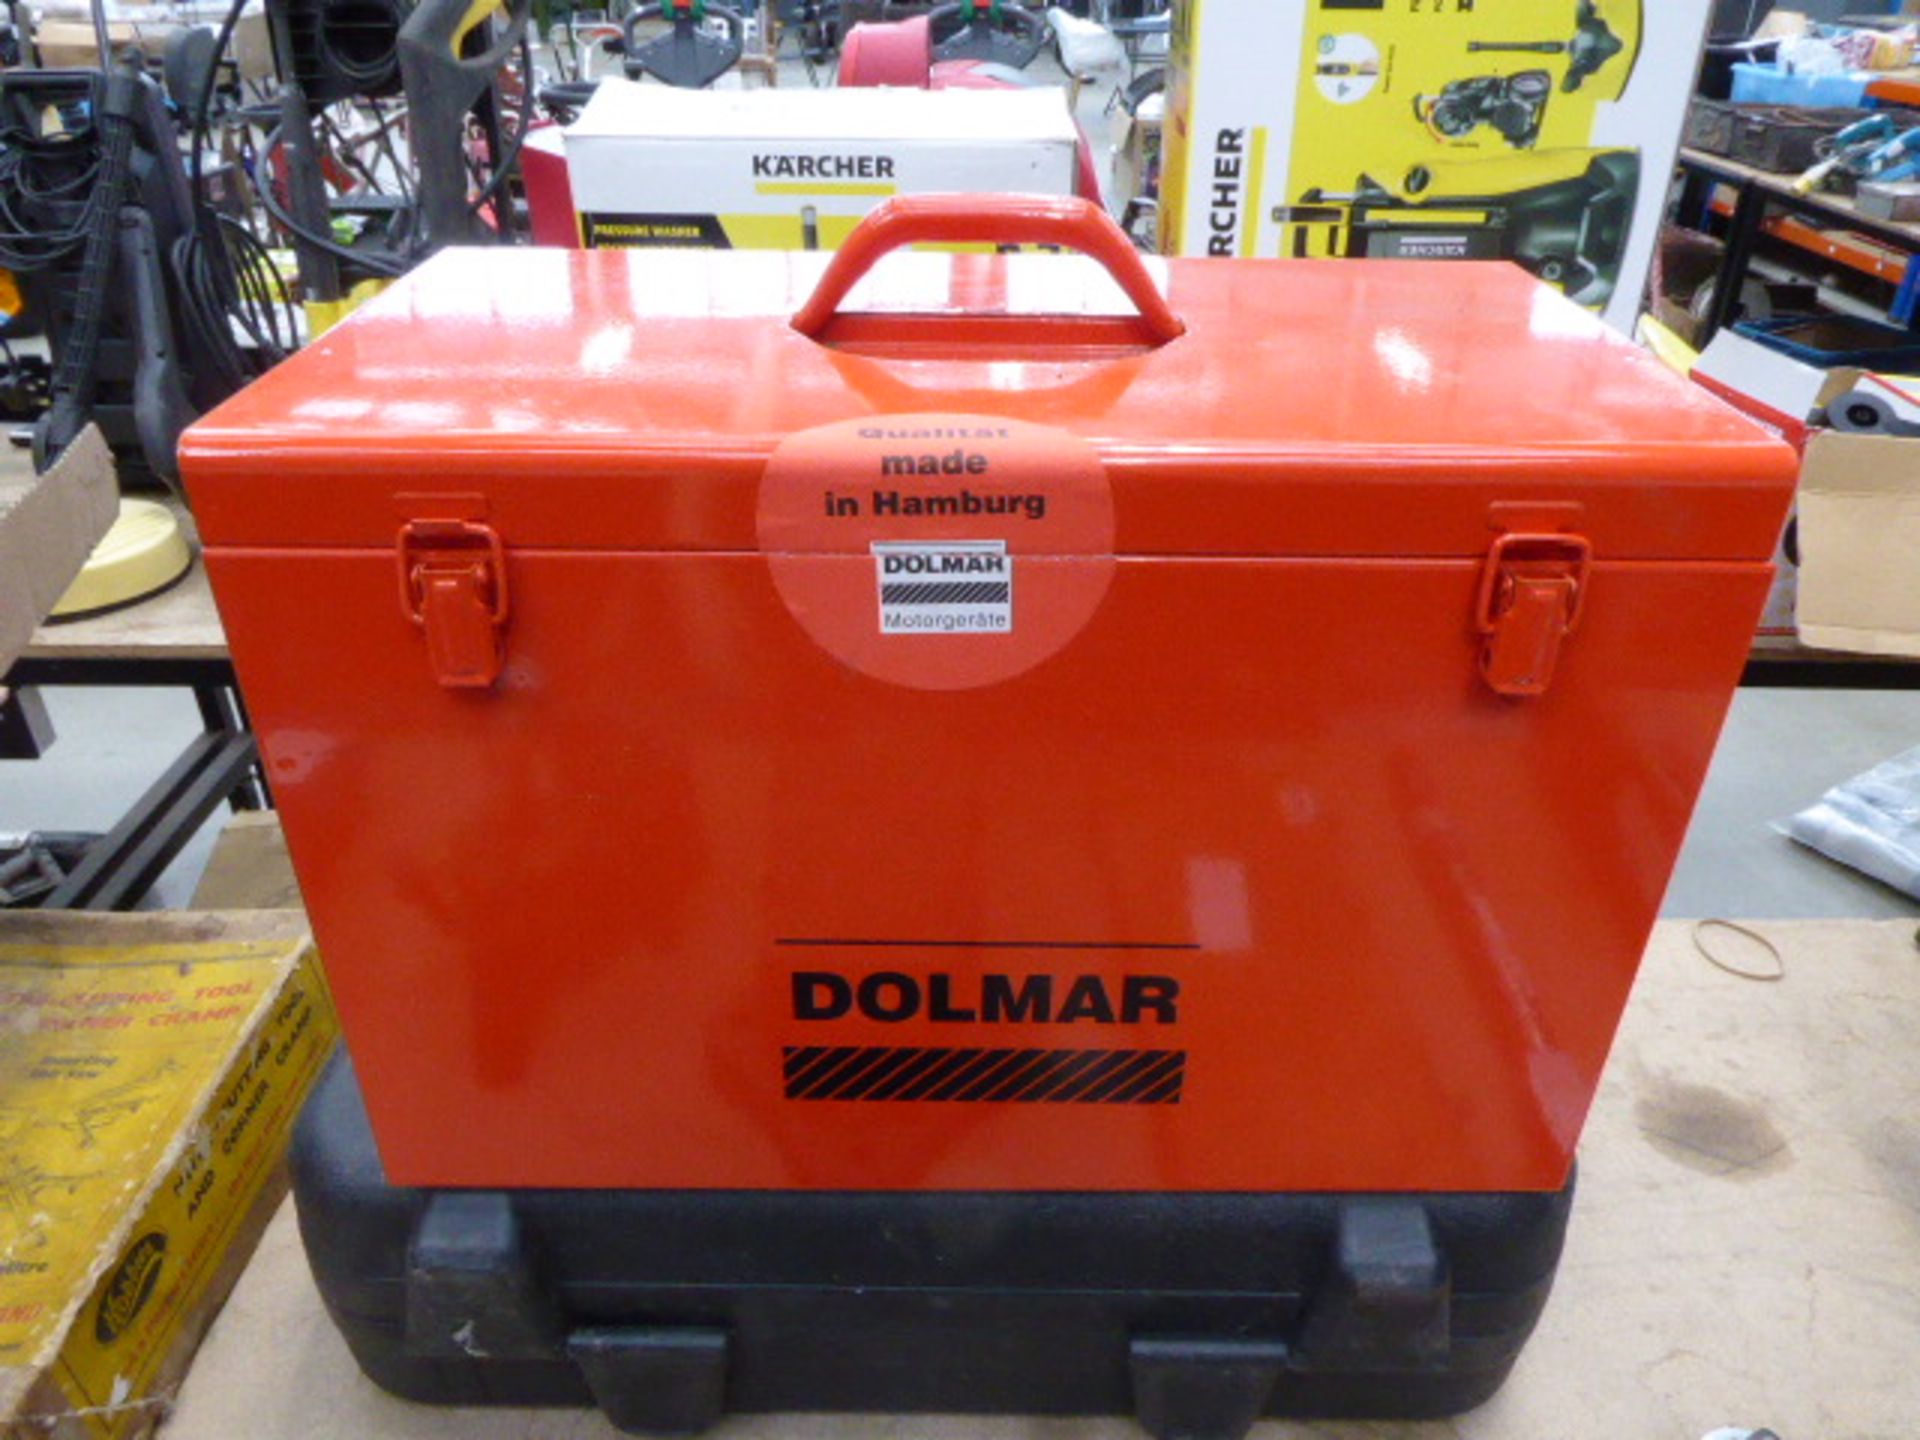 Toolbox in red